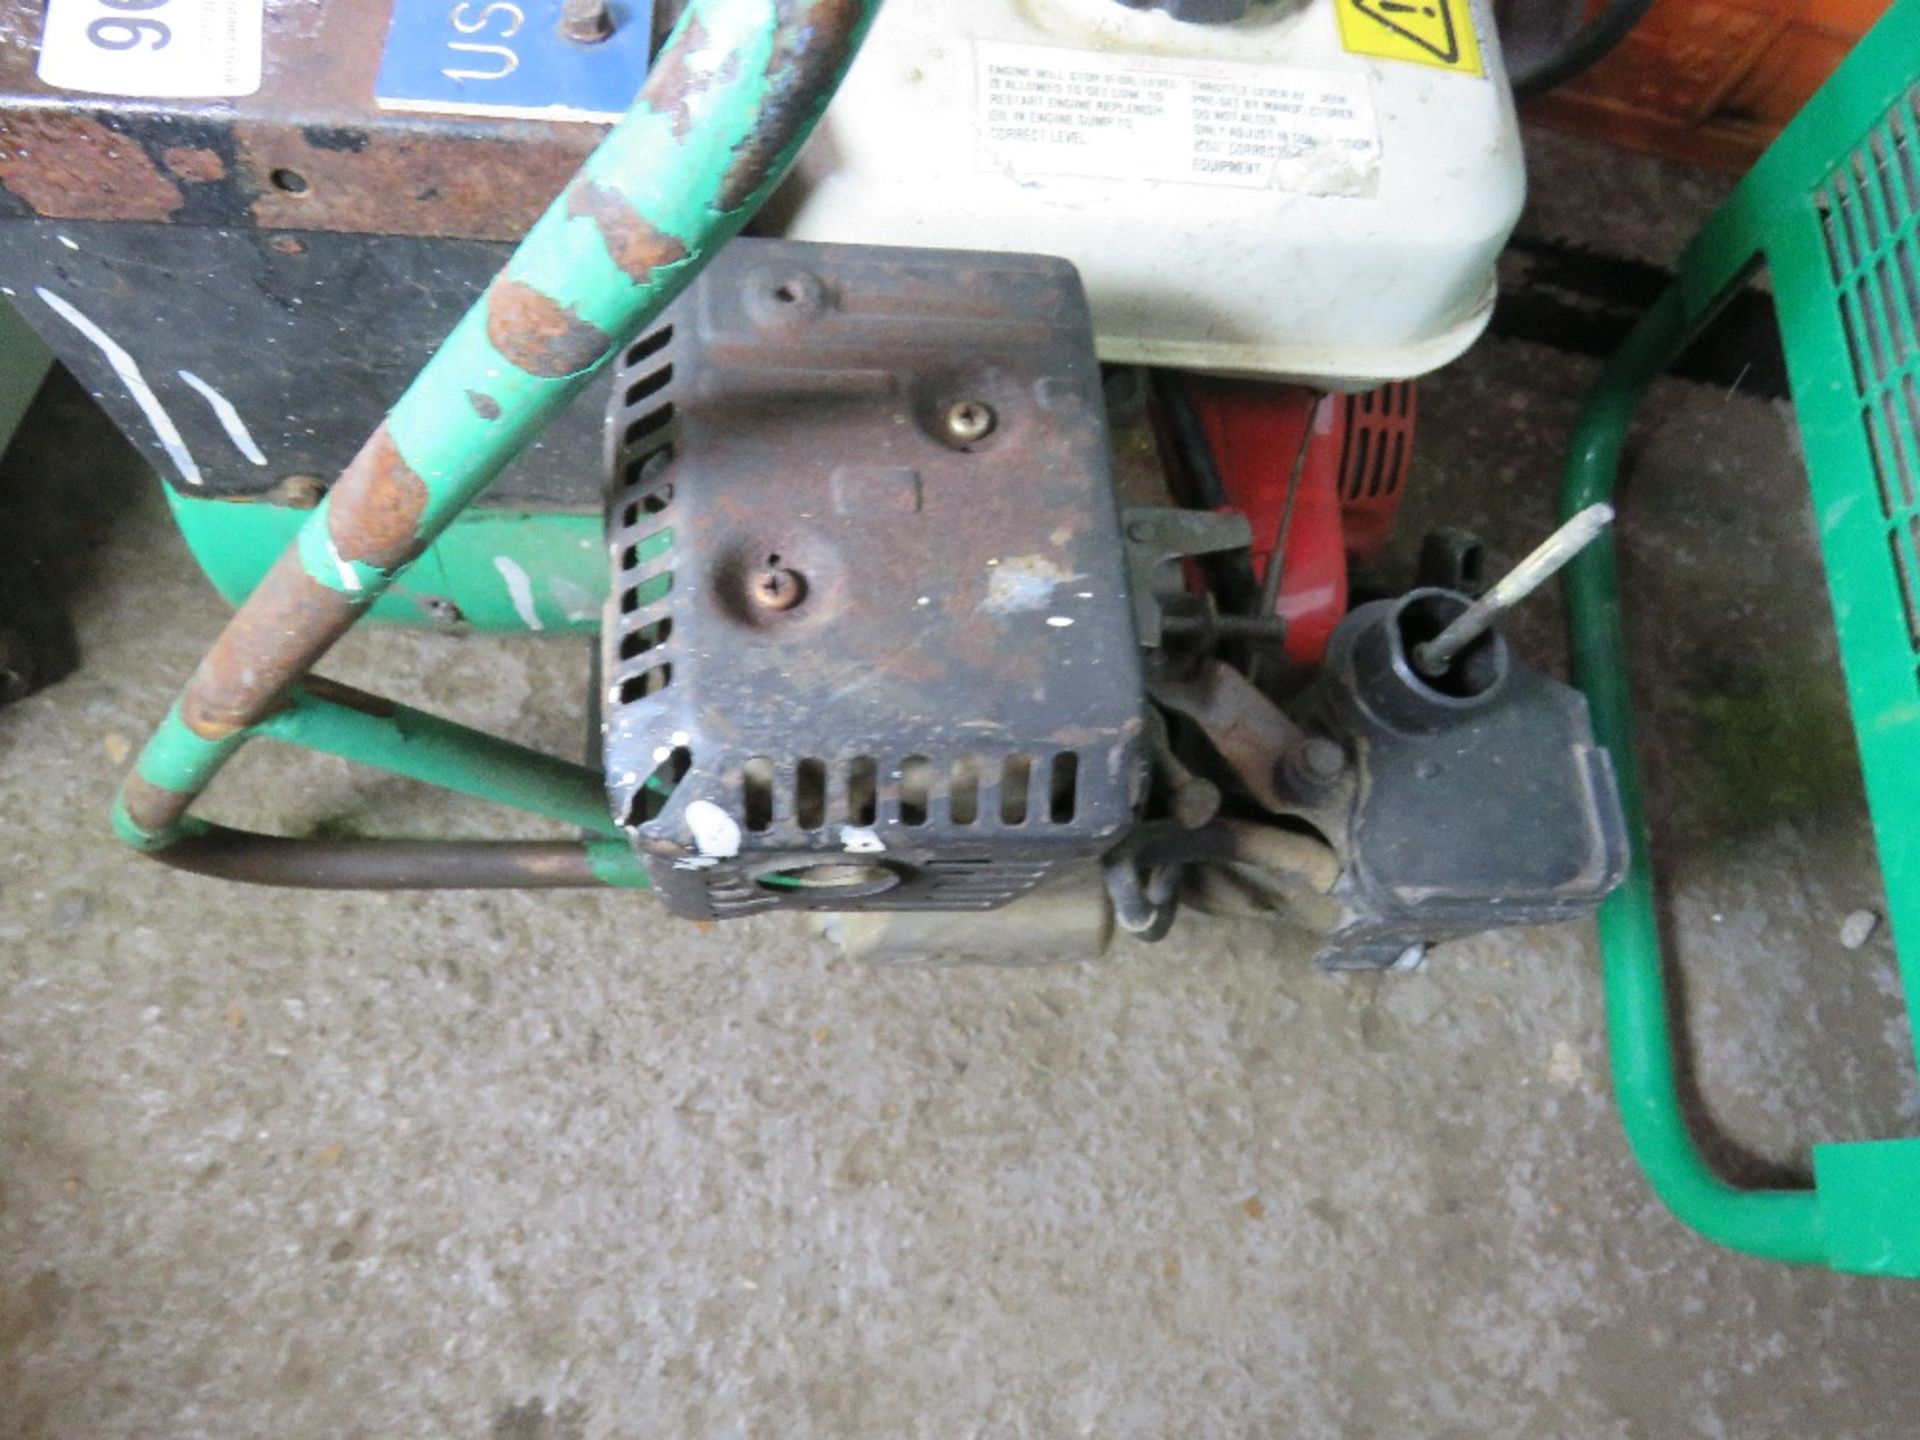 PETROL GENERATOR. UNTESTED, CONDITION UNKNOWN.